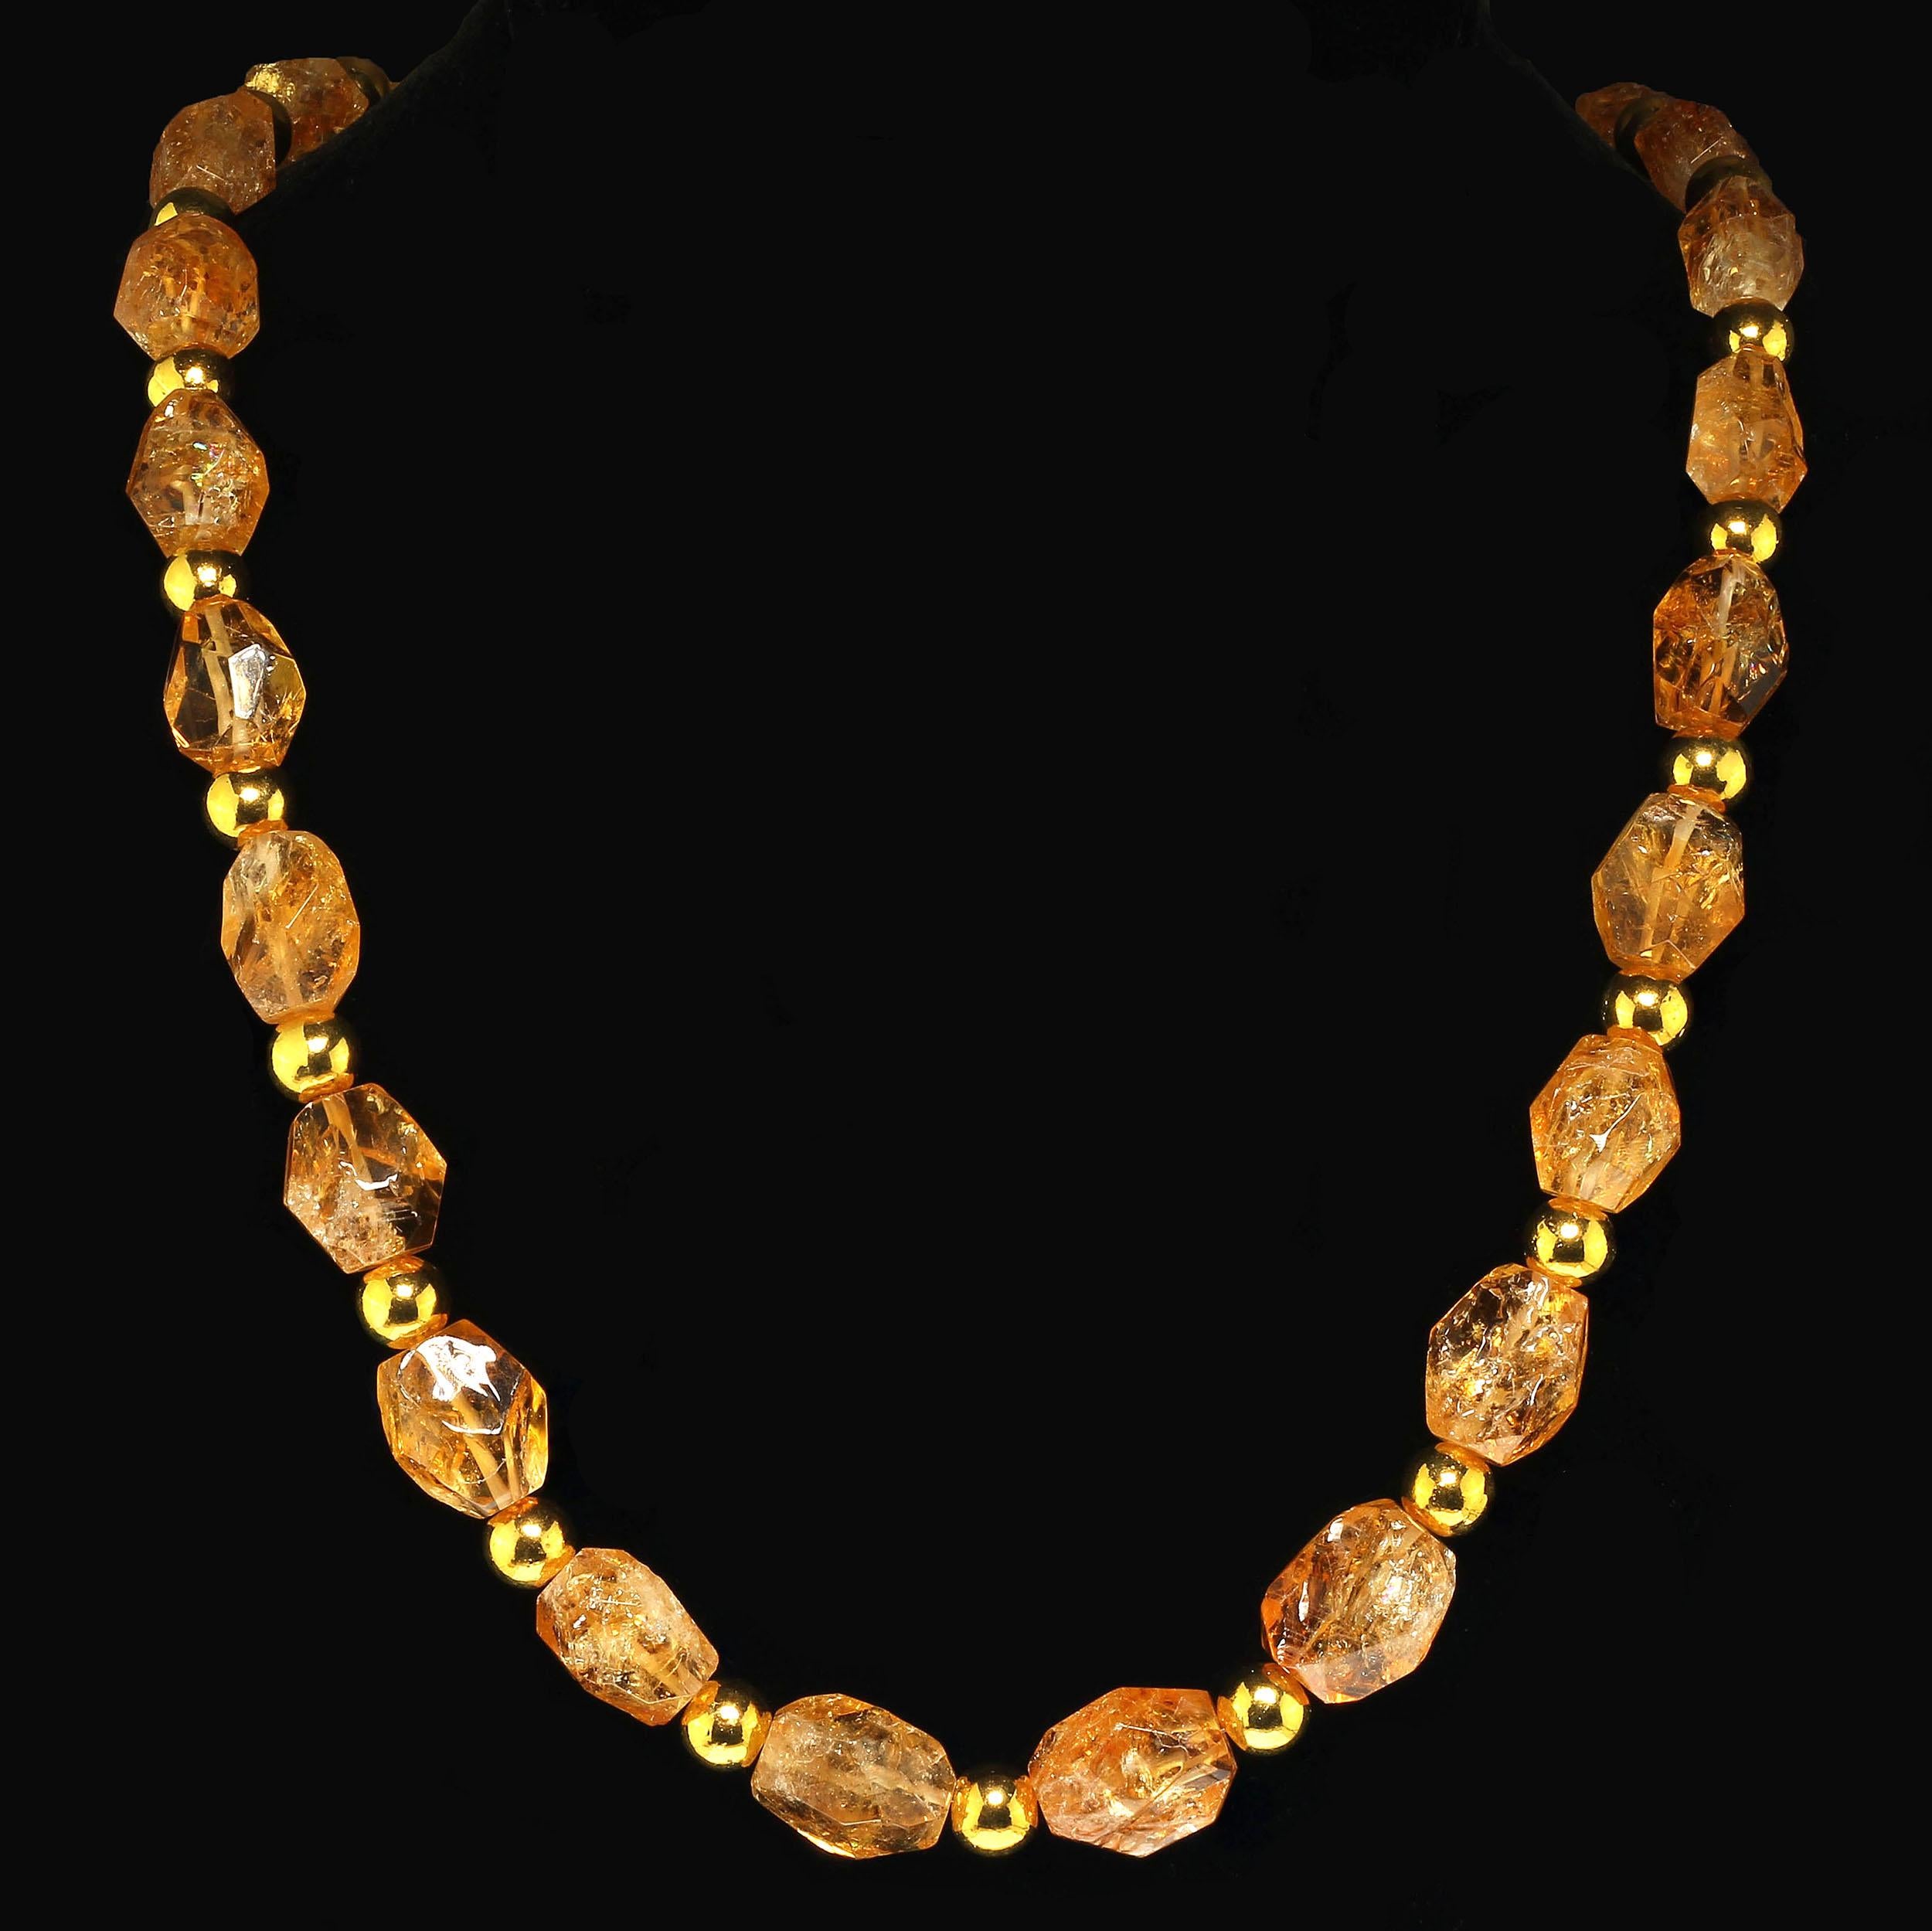 26 inch necklace